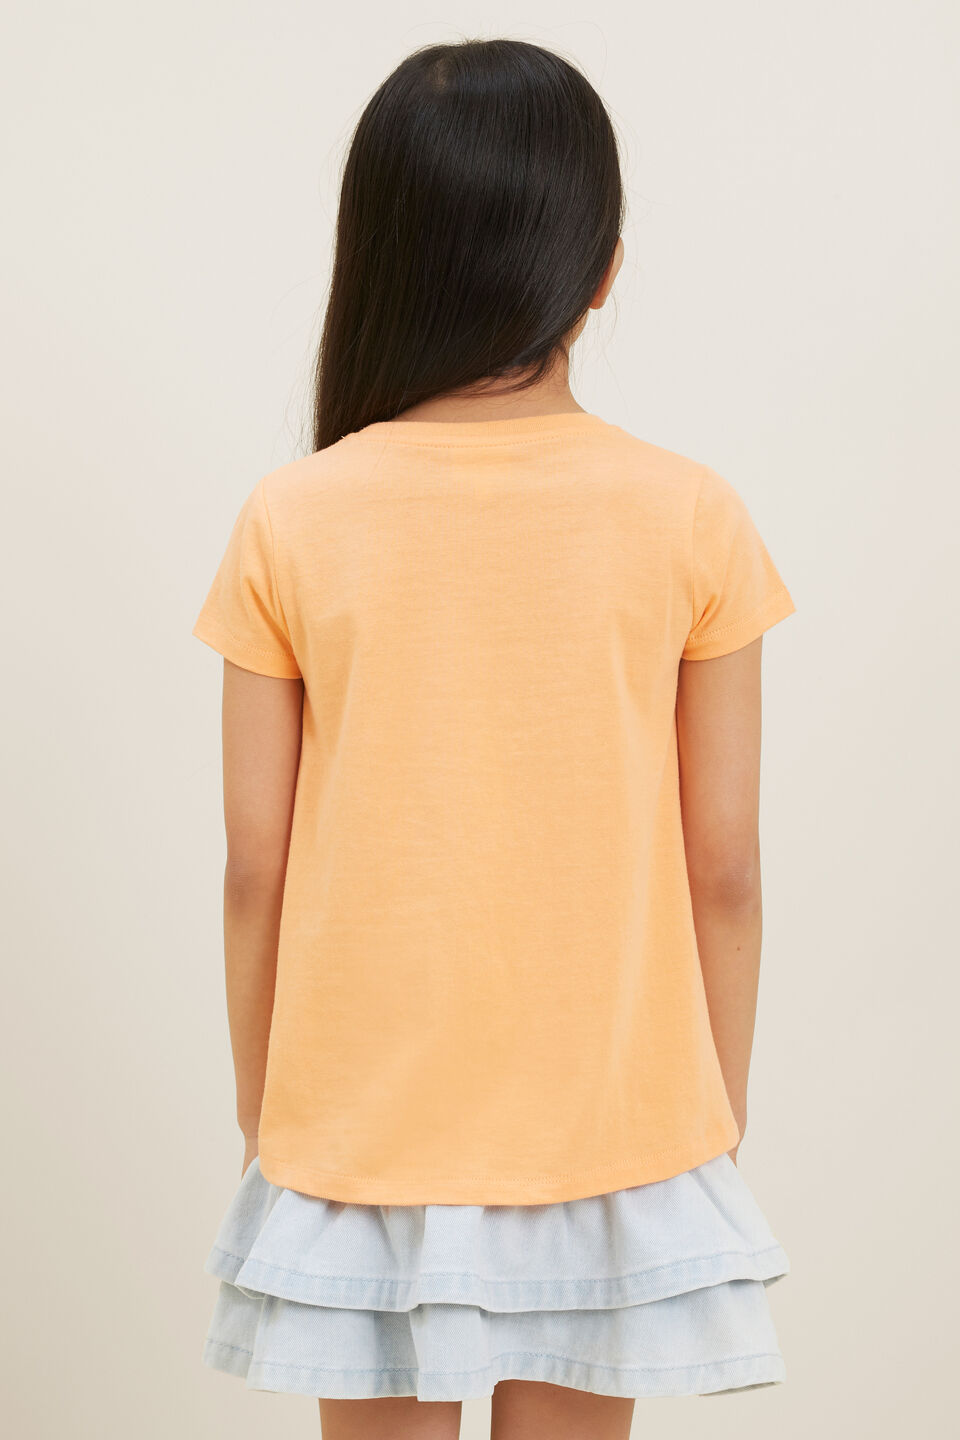 Chenille Flower Tee  Apricot